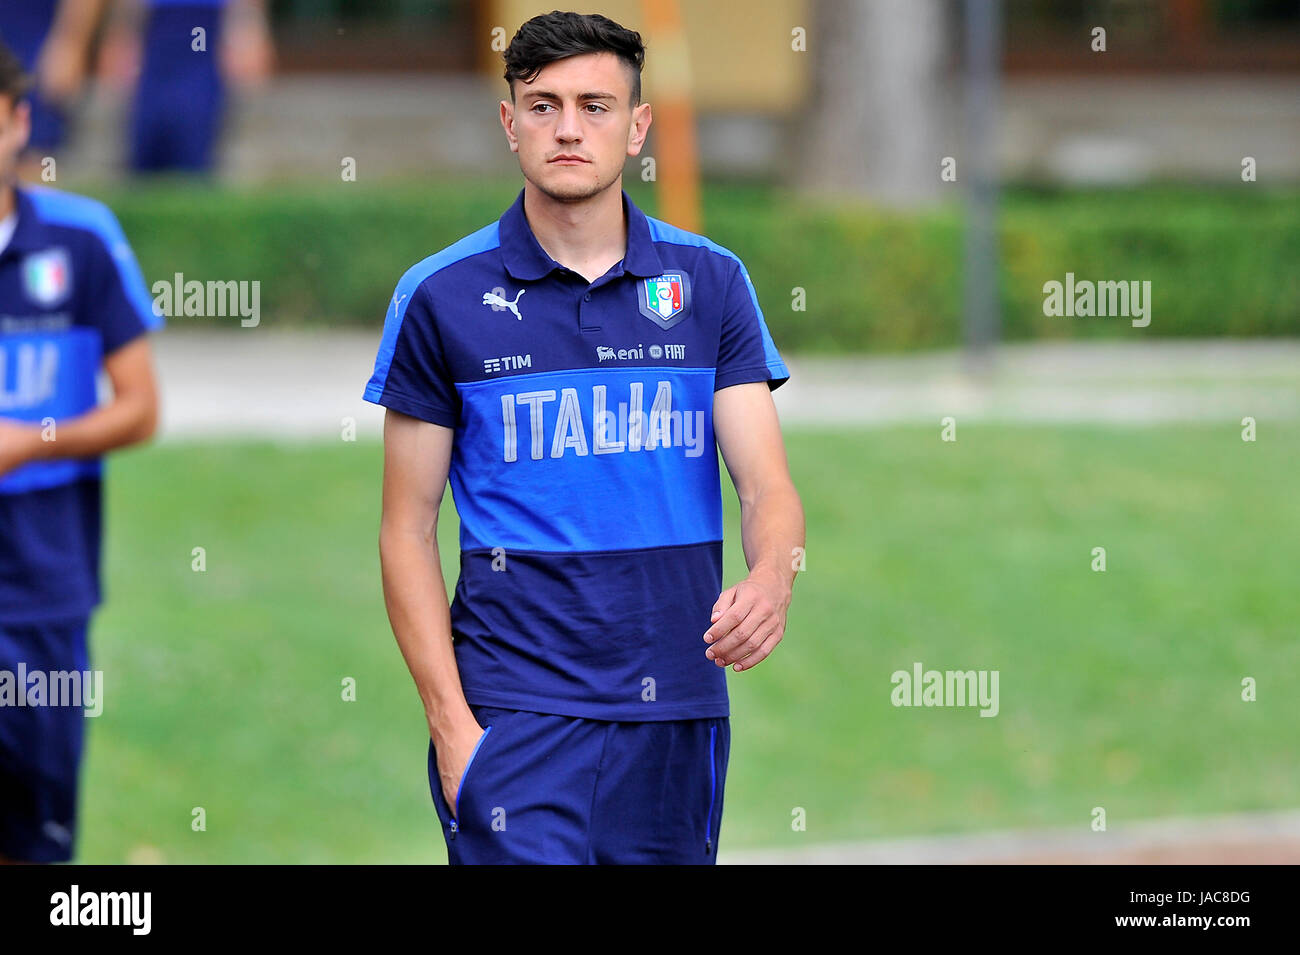 Florence, Italy. 05th June, 2017. Italy's player Alex Ferrari during the training session at the Coverciano Training Center. The Italian national team will face in a friendly match the Uruguay national team in Nice on 7th June 2017 and Liechtenstein in Udine on 11th June 2017, match valid for FIFA World Cup Russia 2018 Qualifiers Europe Group G. Credit: Giacomo Morini/Pacific Press/Alamy Live News Stock Photo